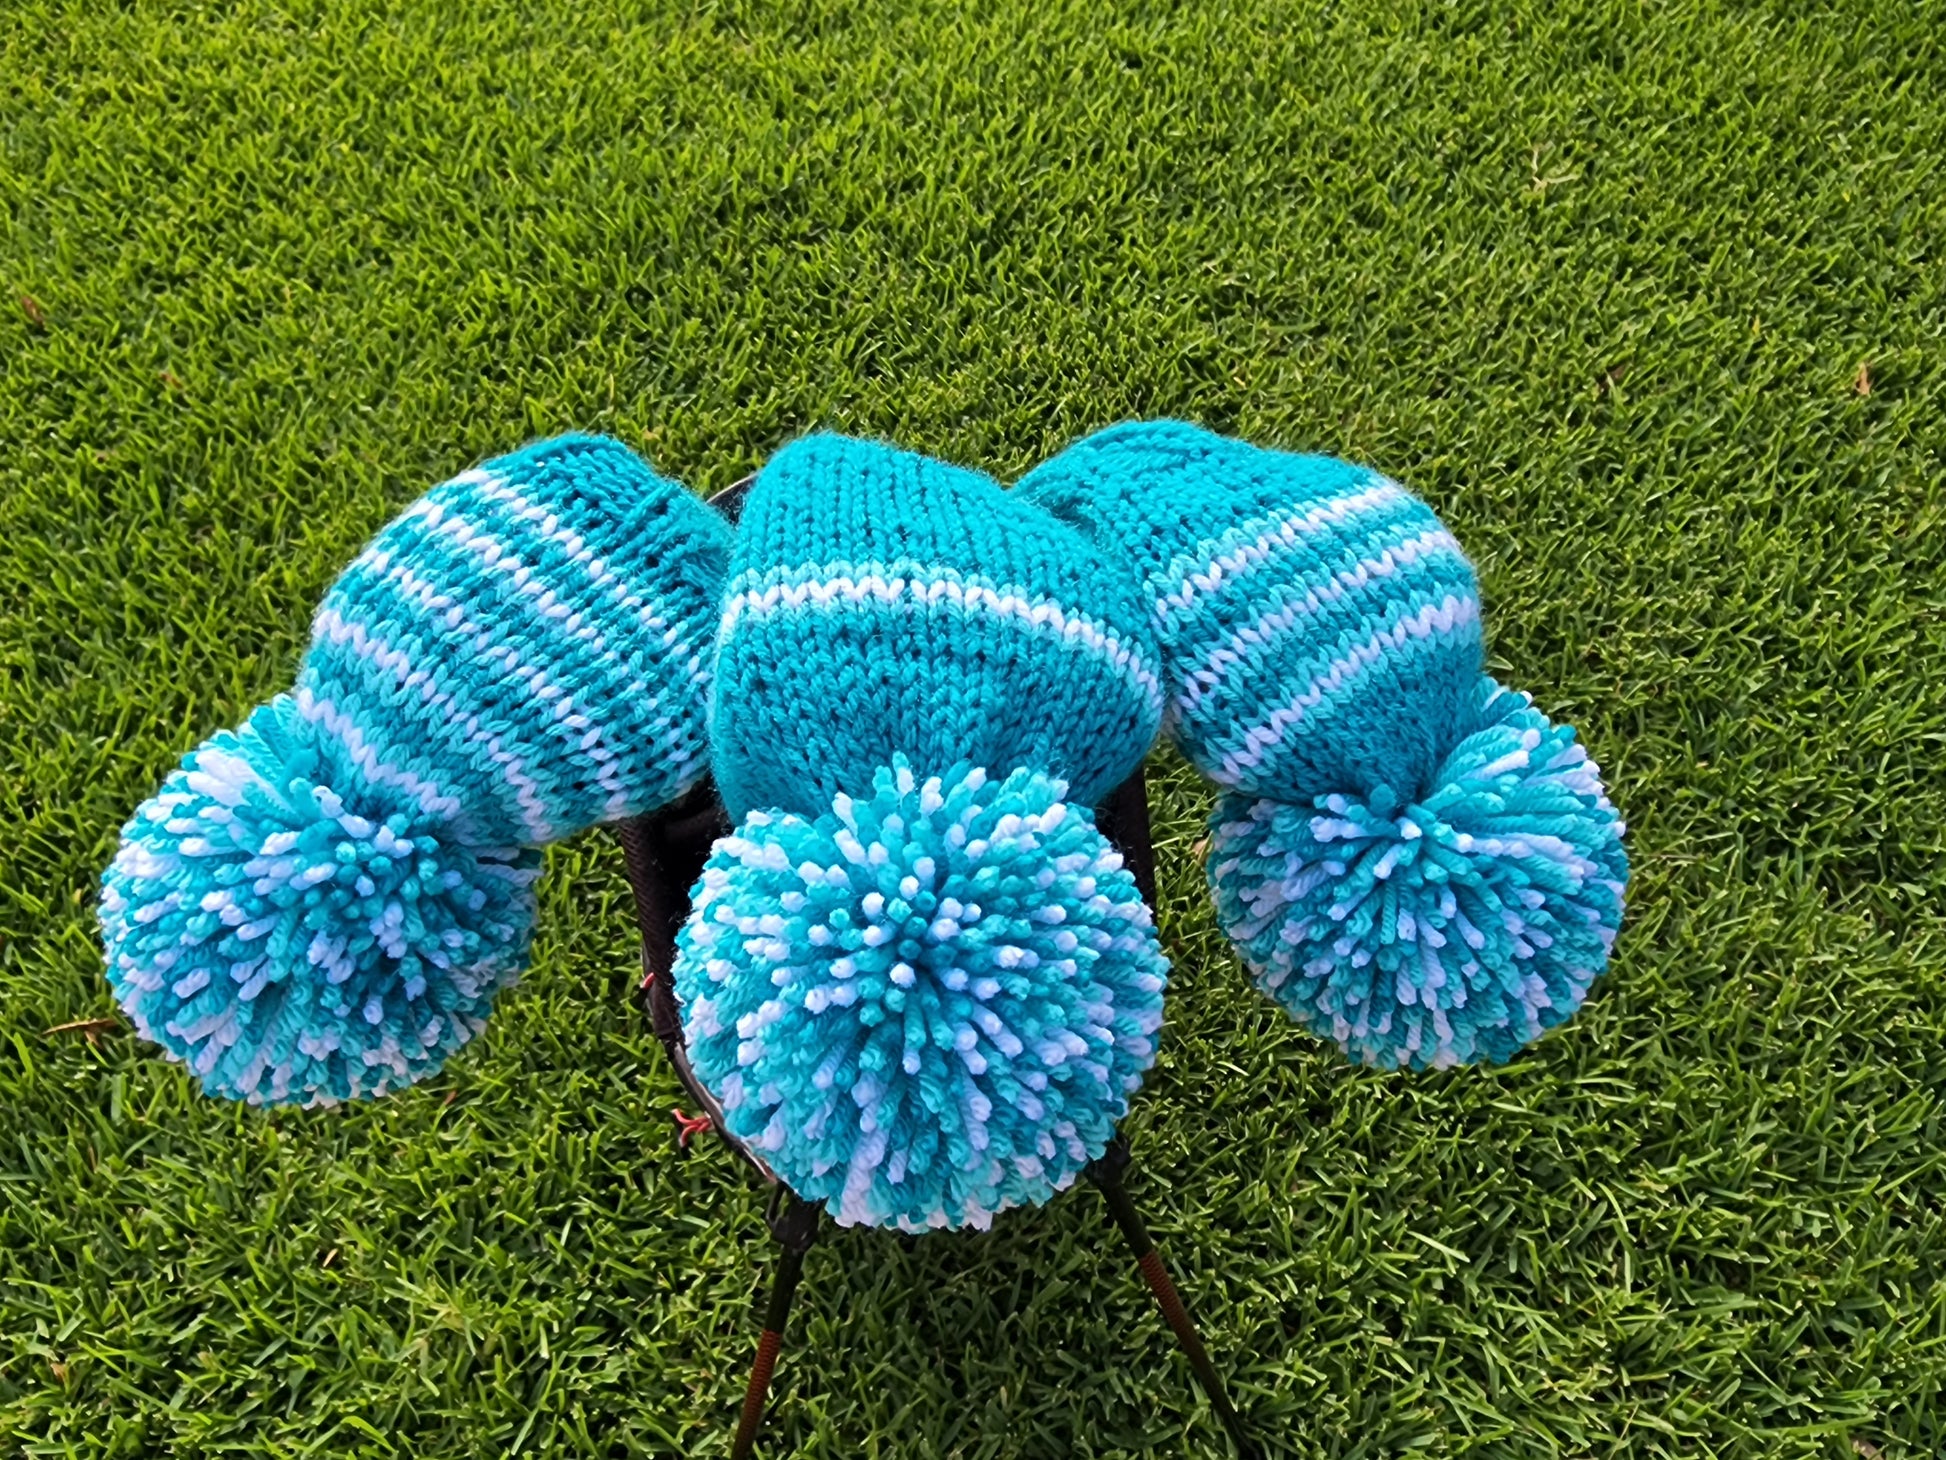 Three Golf Club Head Covers Retro-Vintage Teal, Aqua & White with Pom Poms for Drivers, Woods - Austinknittylimits